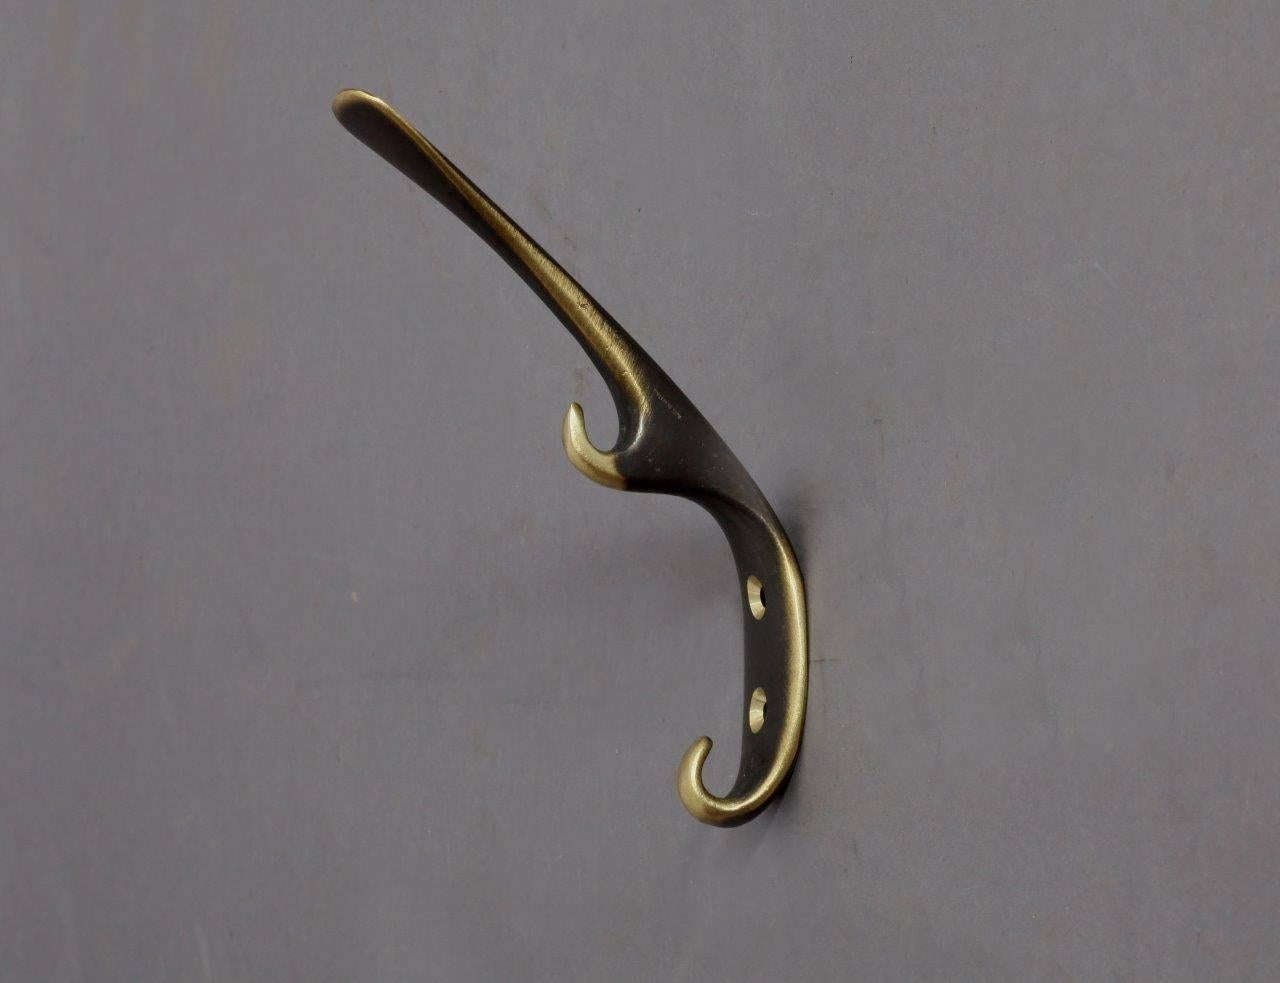 Five wall hooks,
made by Carl Auböck, Vienna, 1960.
Solid brass.
Measures: Height 20cm,
width 3 cm,
depth 11cm.
 